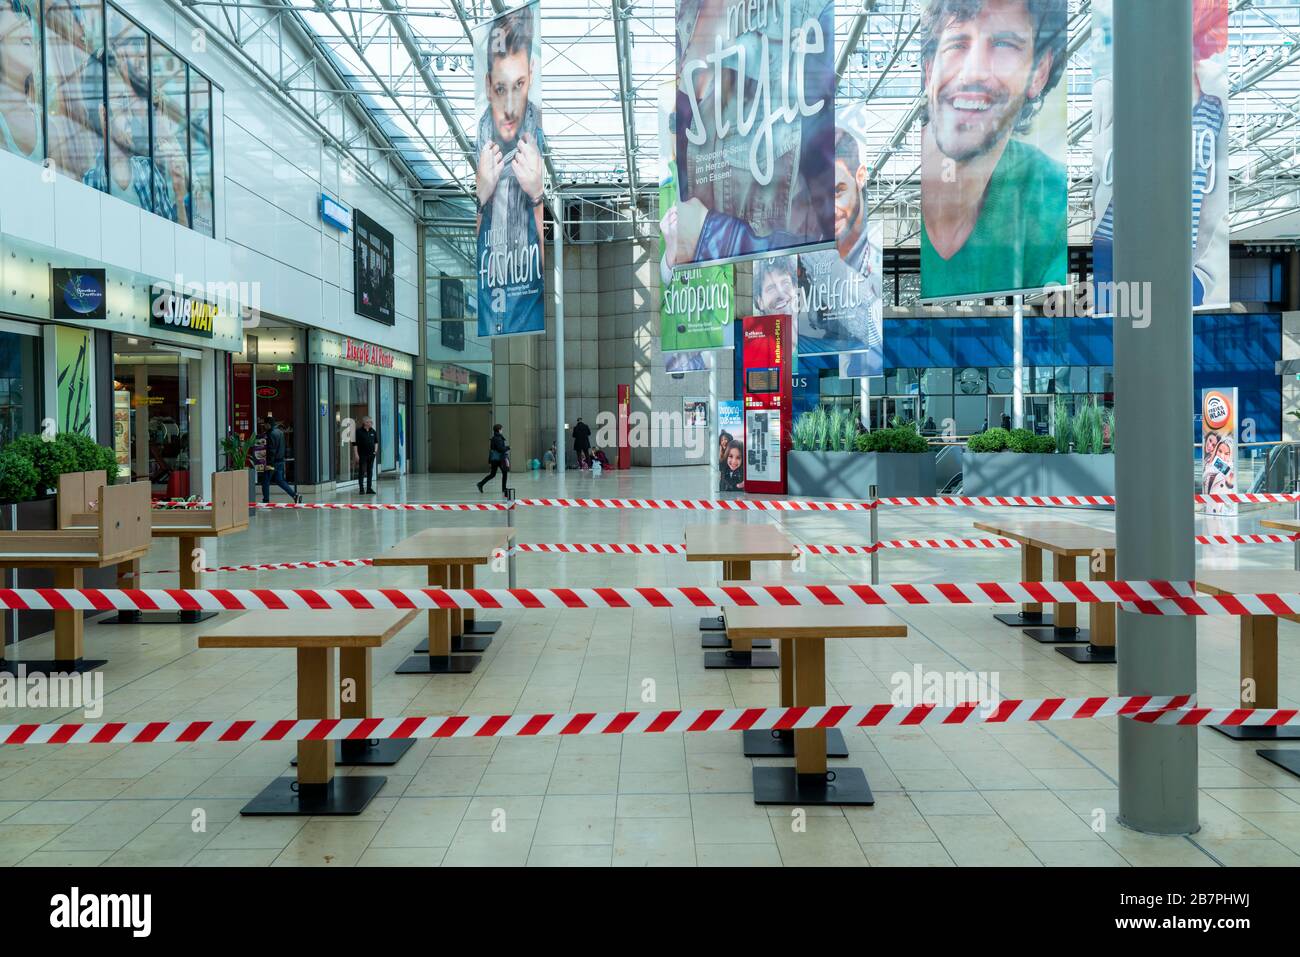 Effects of the coronavirus pandemic in Germany, food, shopping centre Rathaus Galerie, cordoned-off areas, seating, dining tables for fast food restau Stock Photo